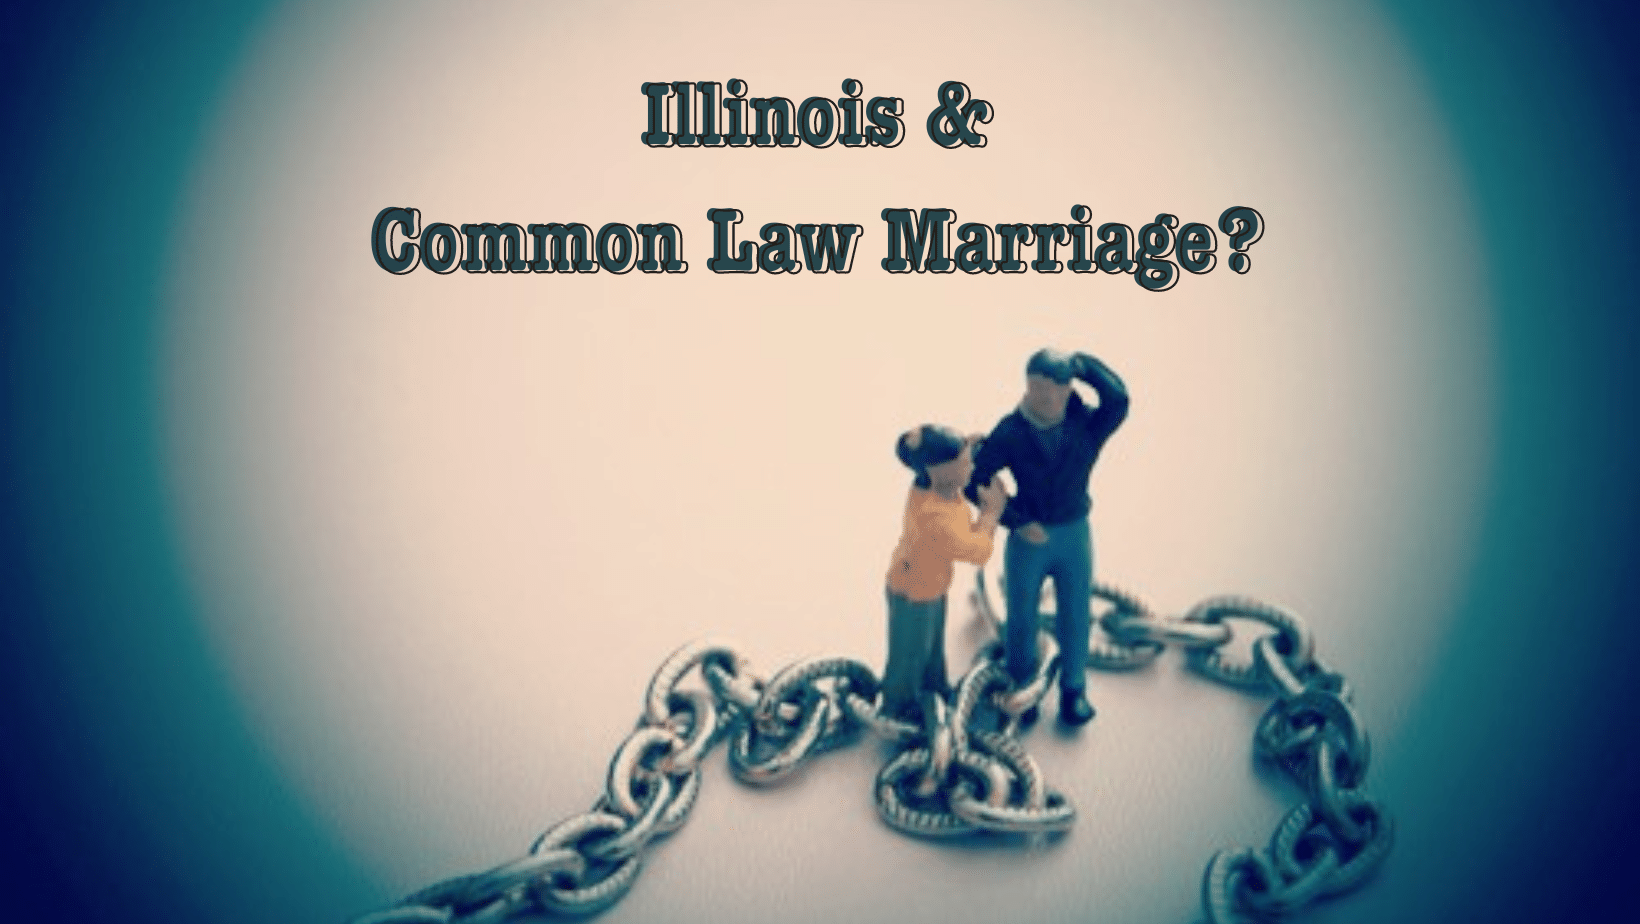 How Does Illinois Treat Common Law Marriage? pic